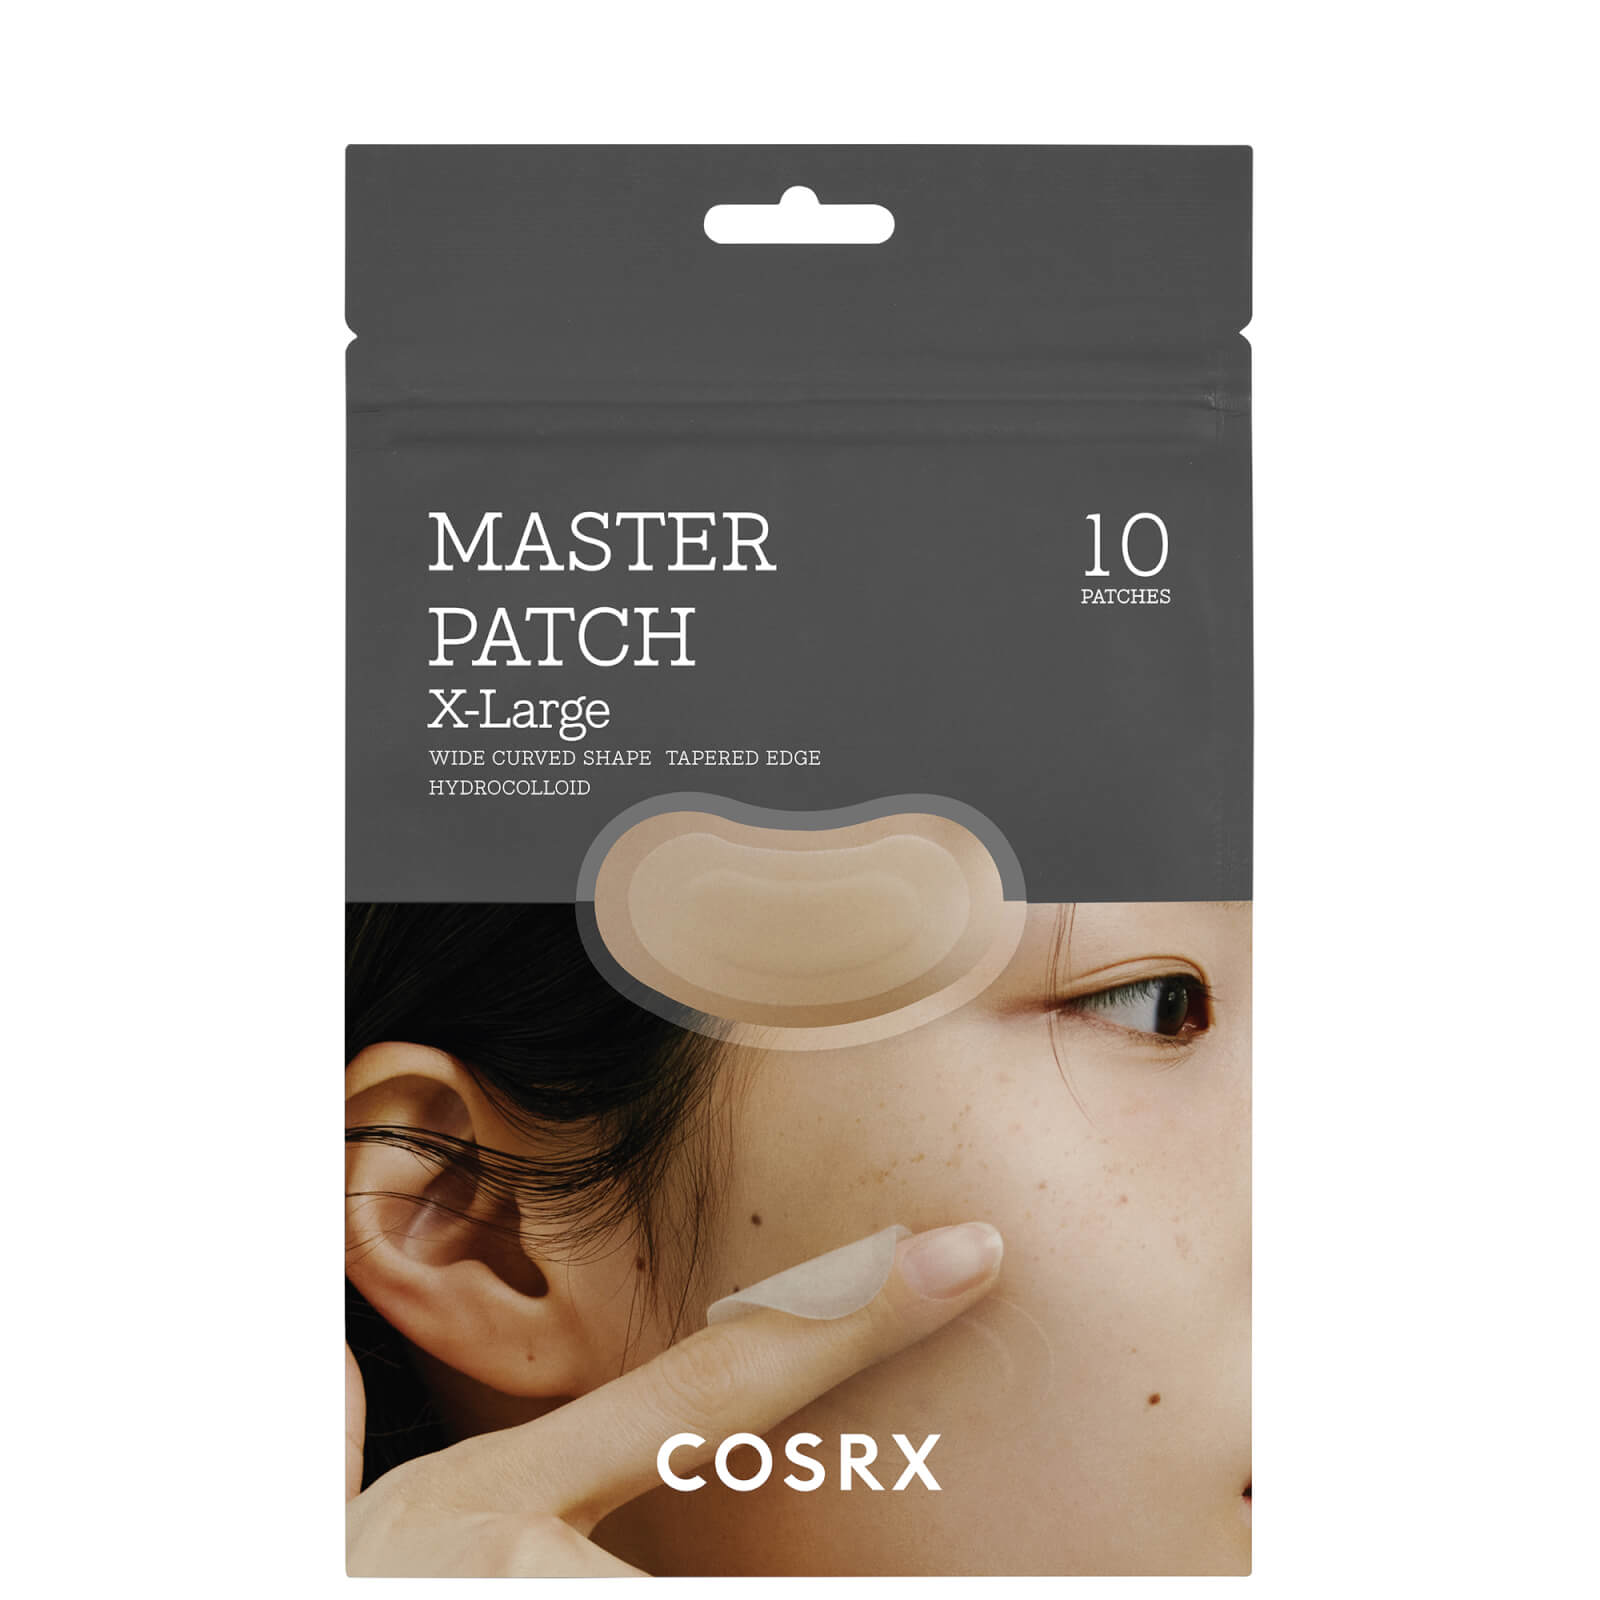 Photos - Cream / Lotion COSRX Master Patch X-Large  (10 Pack)